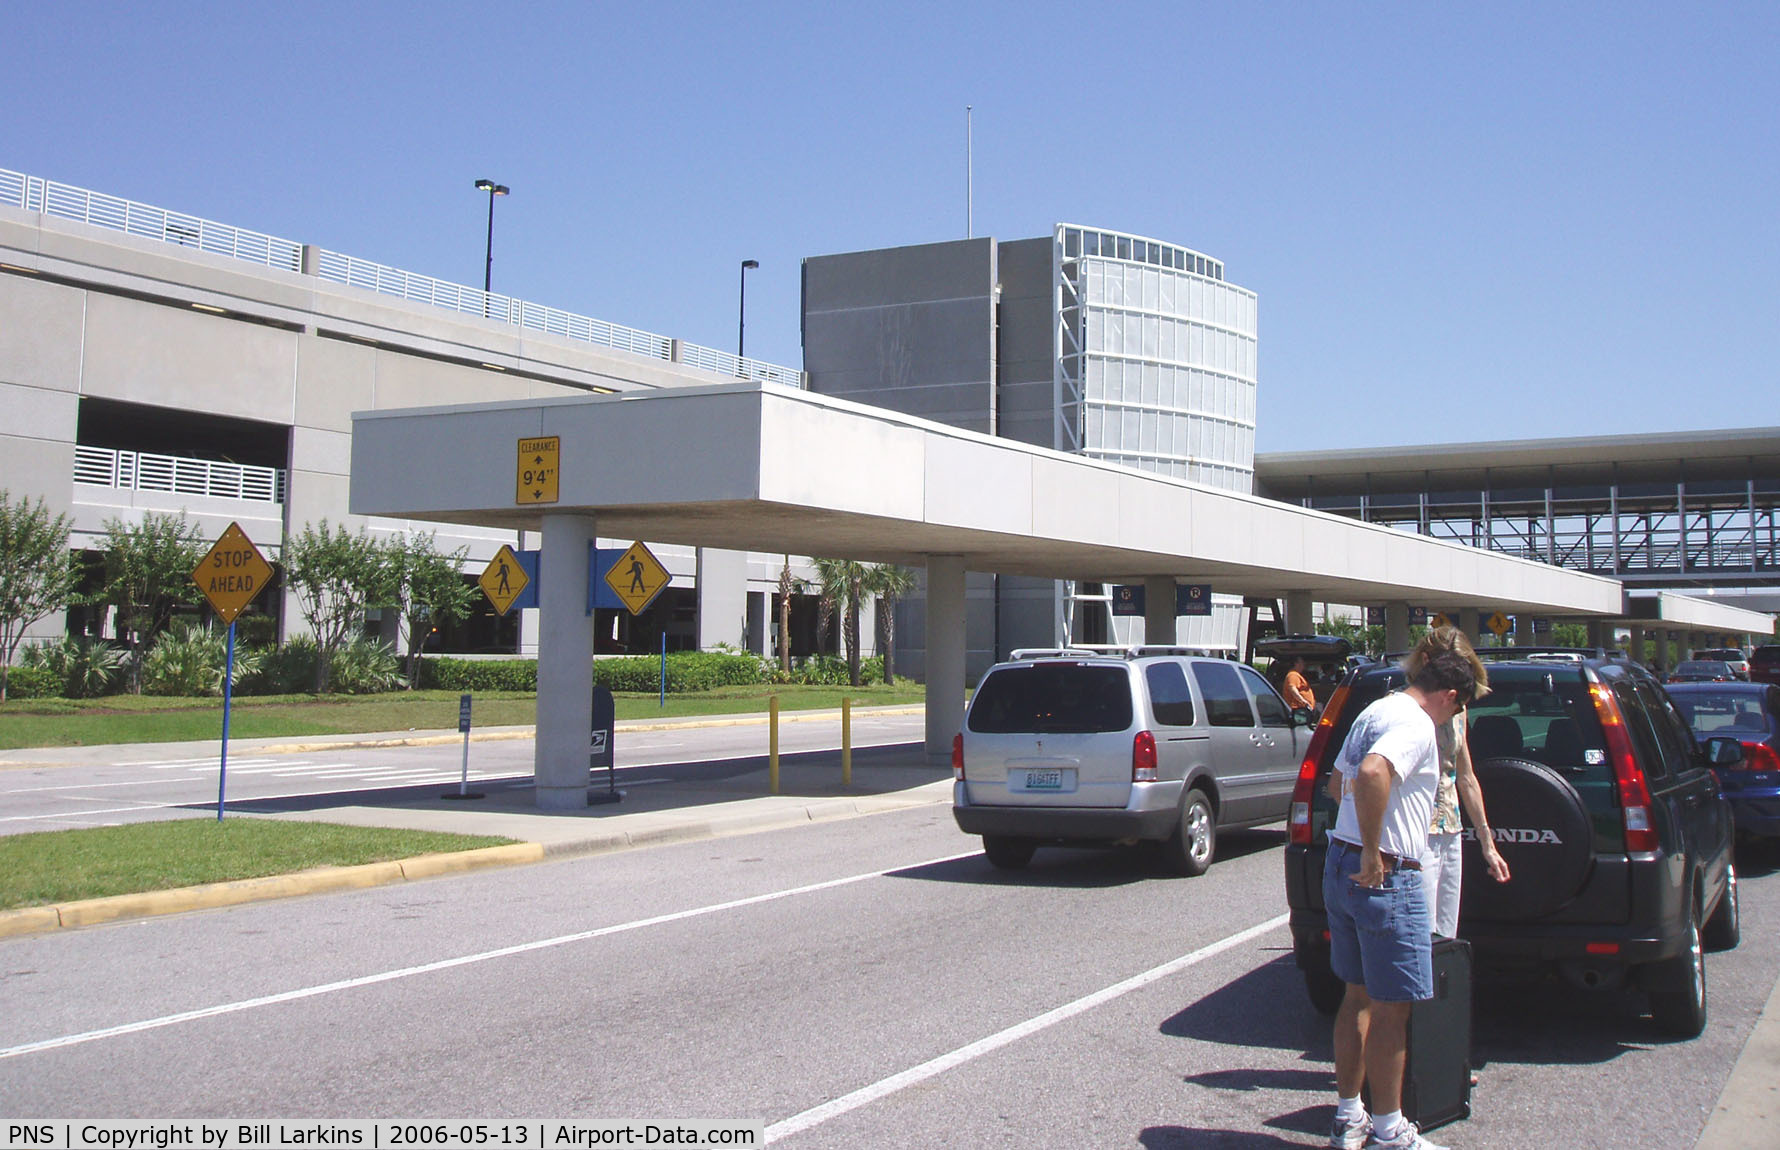 Pensacola Gulf Coast Regional Airport (PNS) - Street entrance with garage on left.